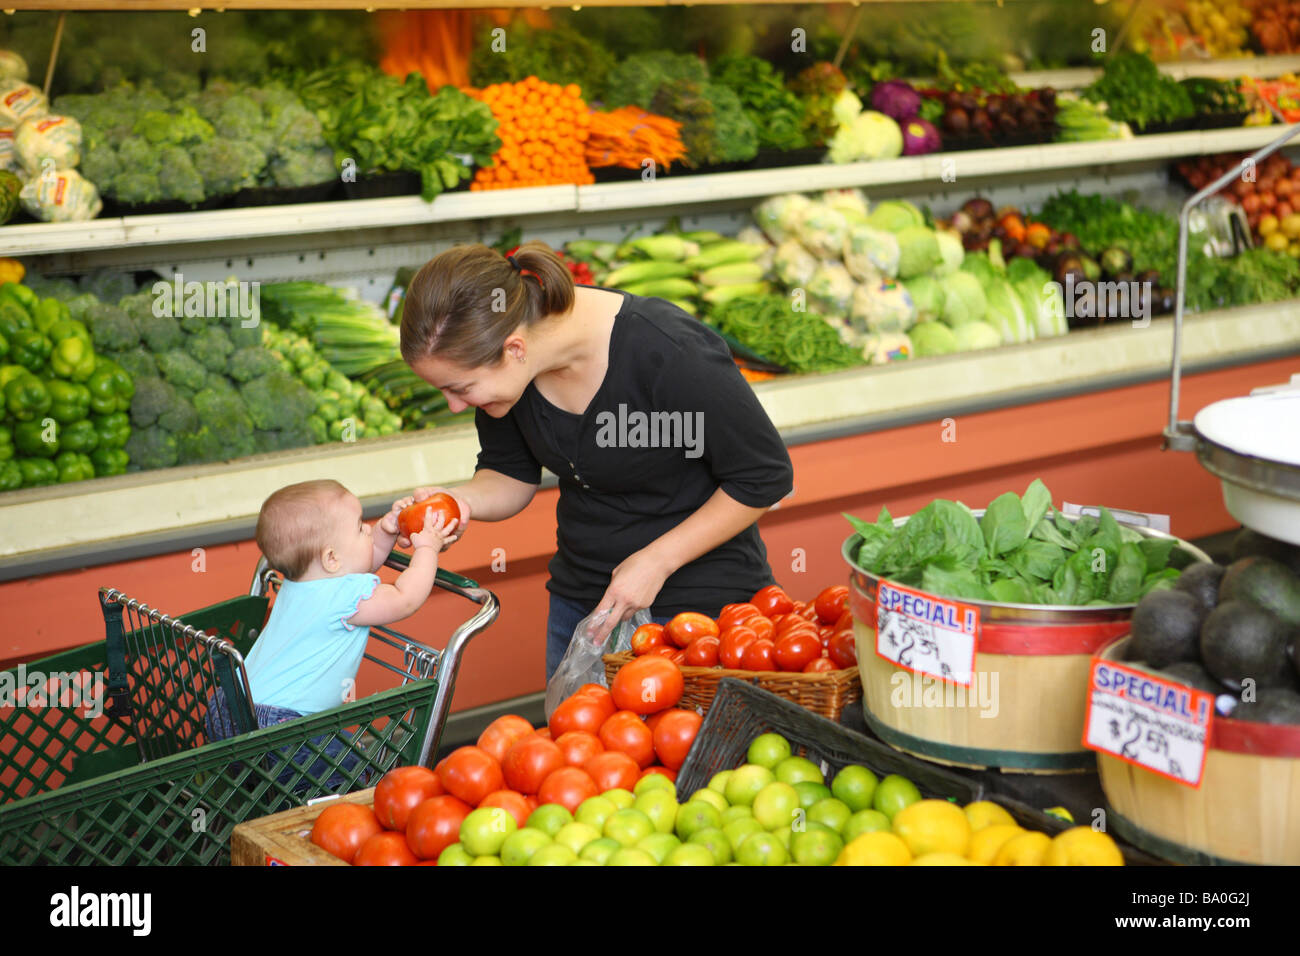 Mom and baby in grocery store picking out produce Stock Photo